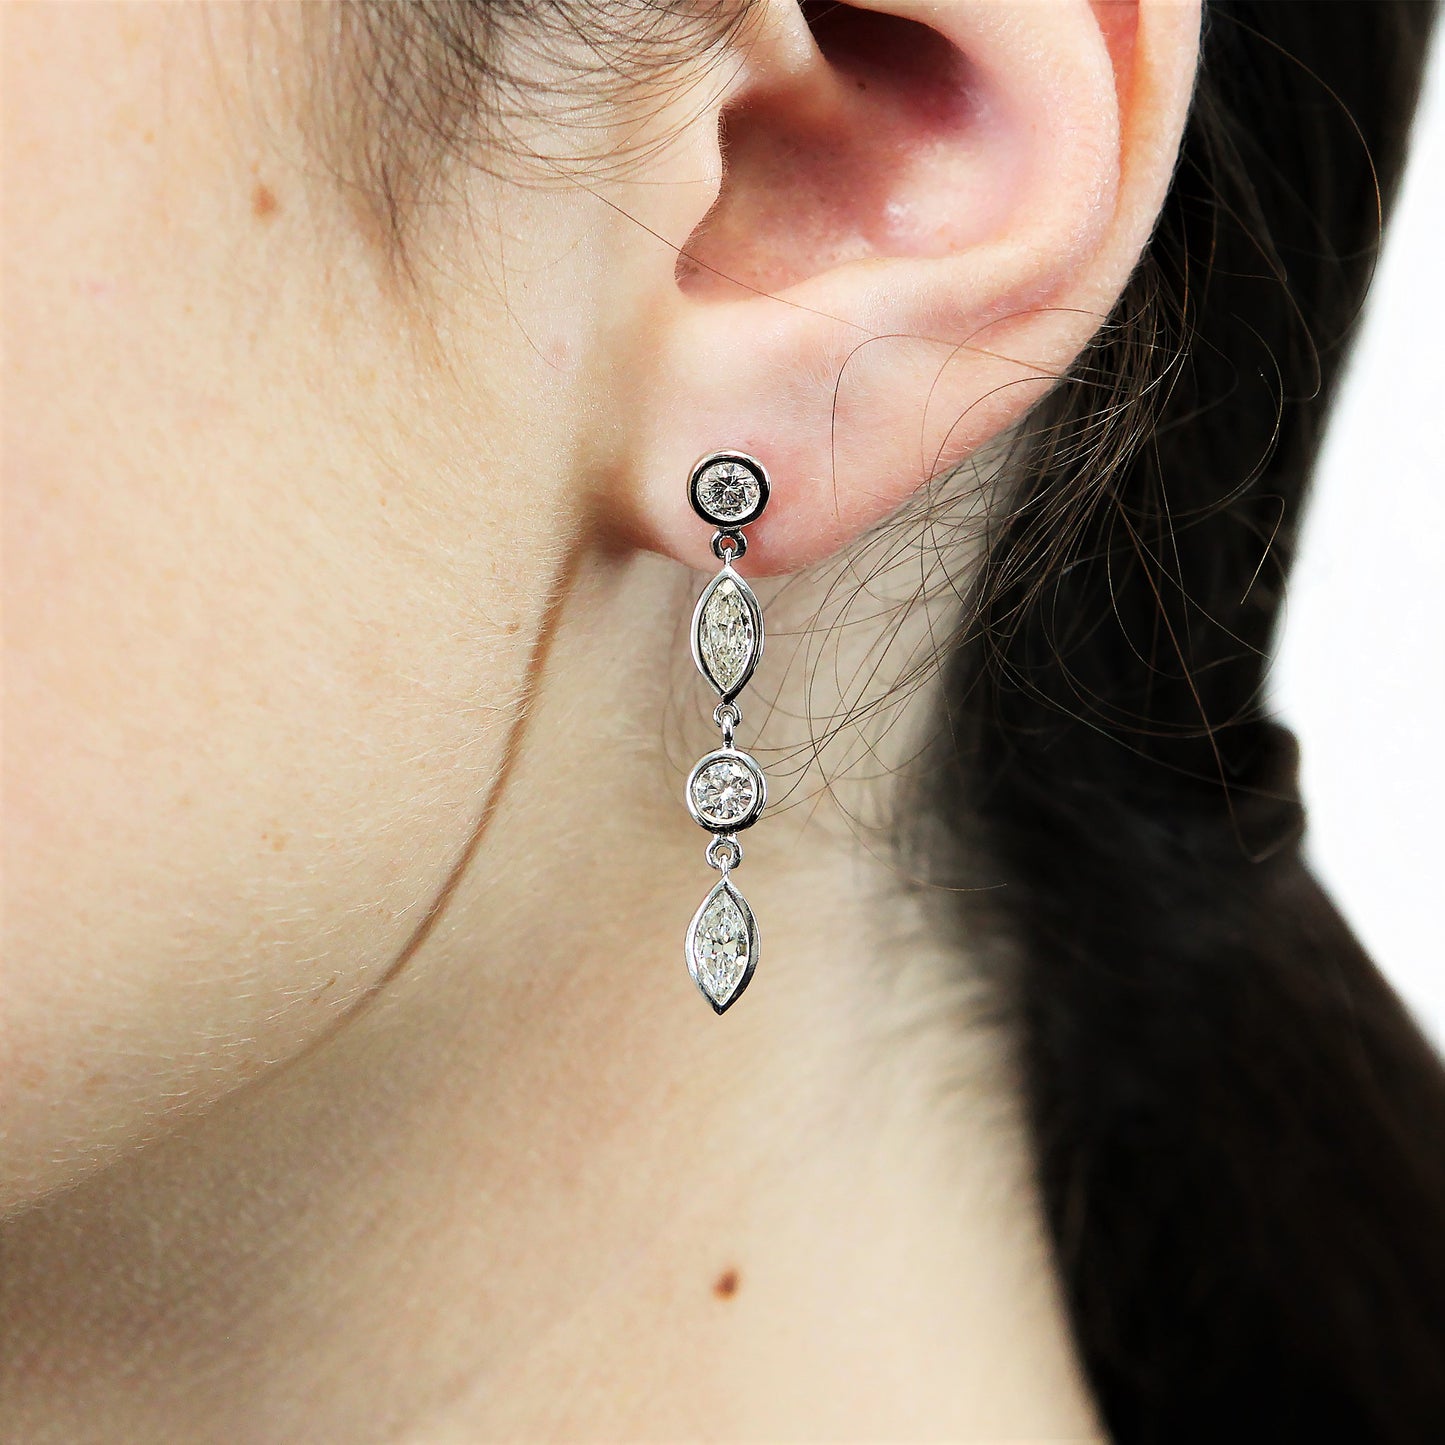 Load image into Gallery viewer, FAB DROPS 14k White Gold Round and Marquise Diamond Drop Earrings
